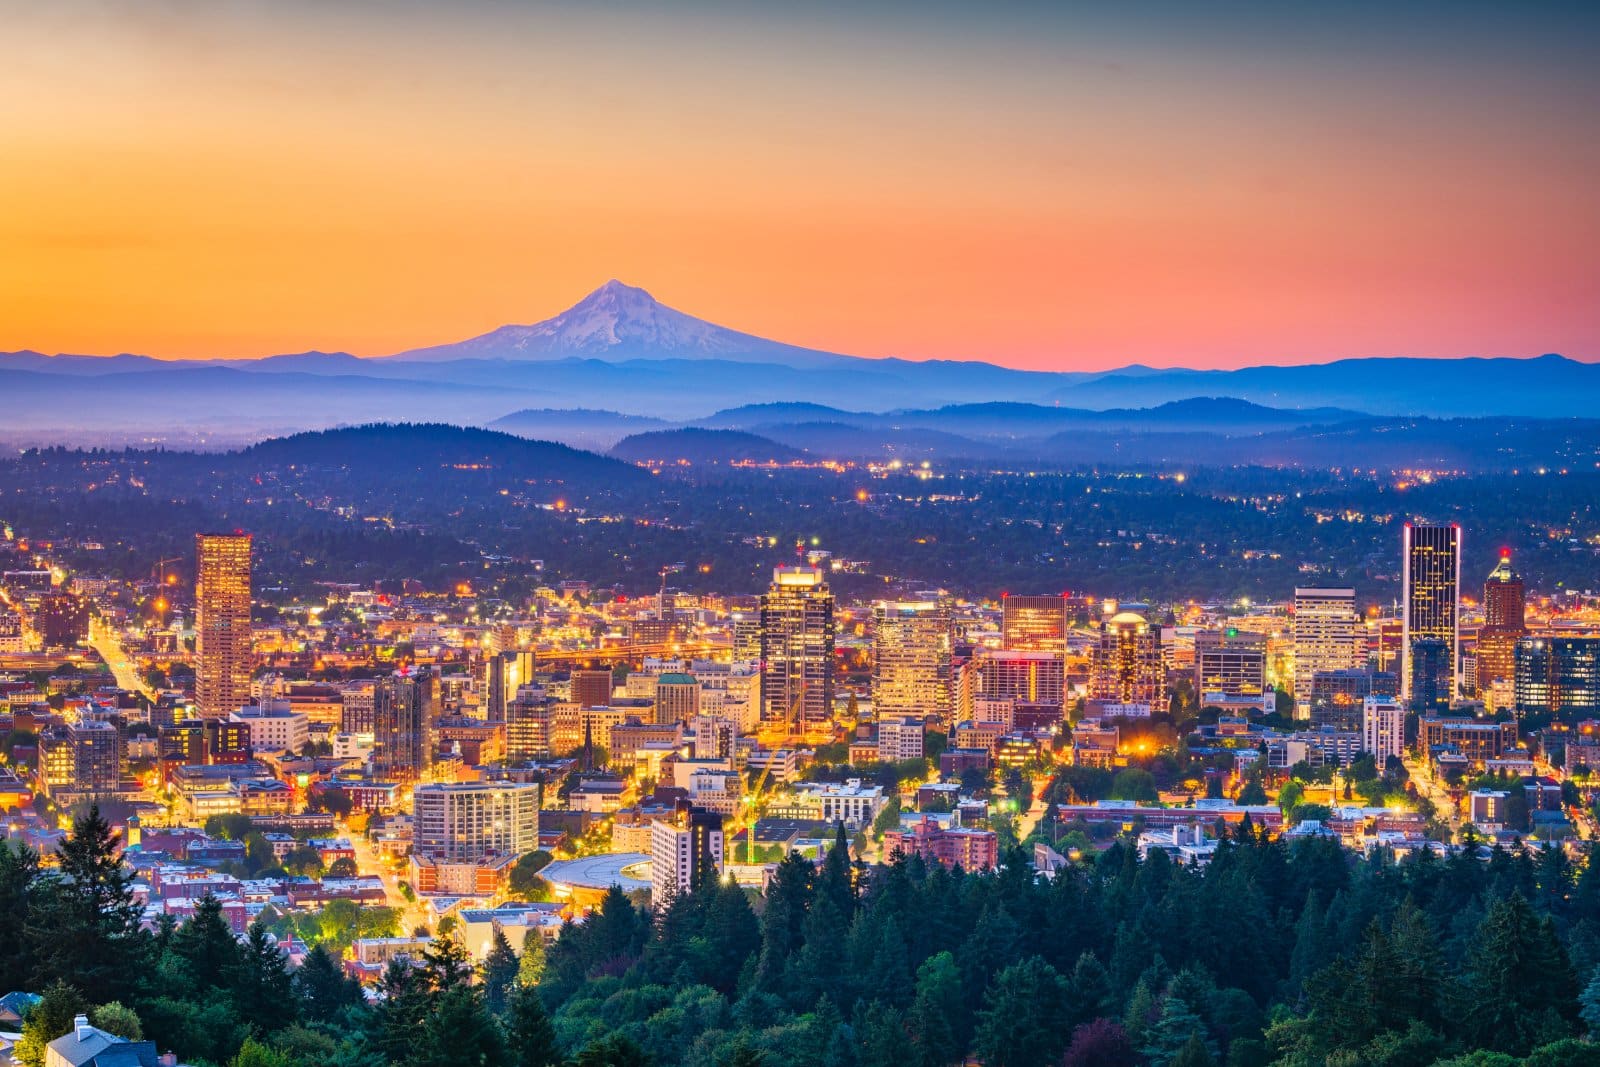 <p class="wp-caption-text">Image Credit: Shutterstock / Sean Pavone</p>  <p>Oregon’s median home price stands at $470,000, with Portland rents at $1,500. No sales tax, but high state income taxes and gas at $3/gallon balance that out. It’s a haven for outdoor enthusiasts and foodies, but your wallet will feel the hike.</p>